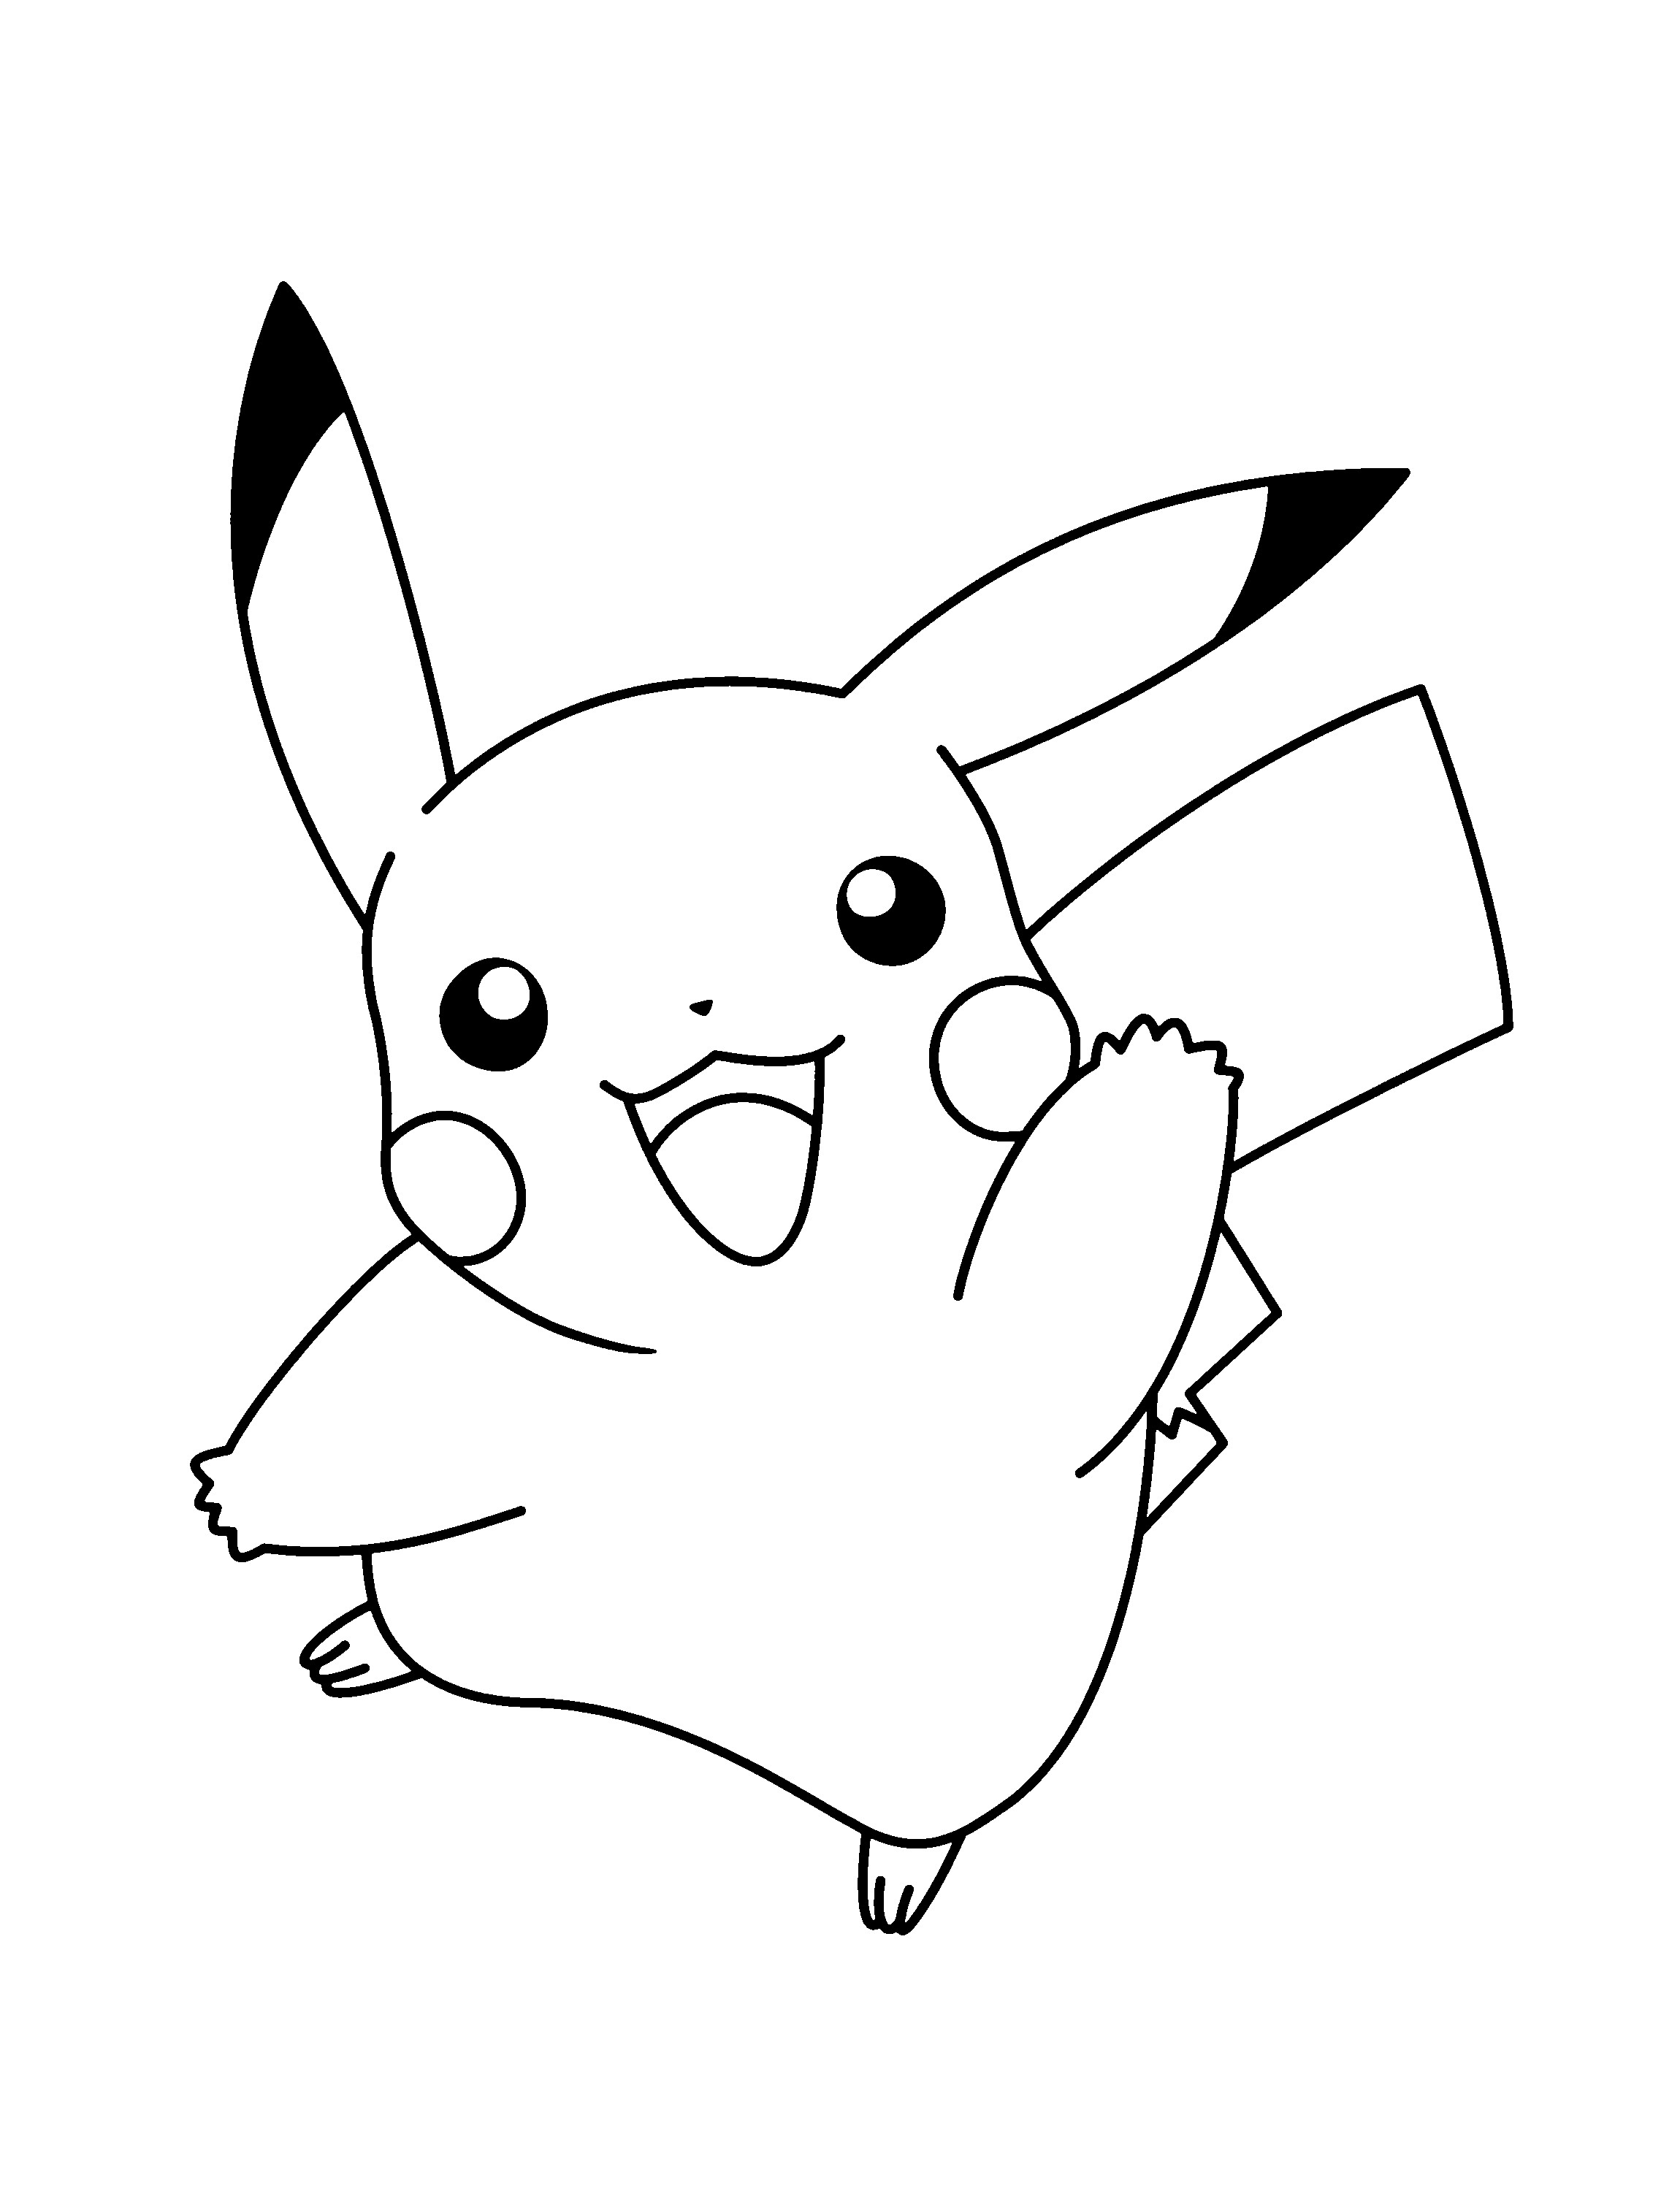 Coloring Sheets For Boys Pokemon
 Pokemon Coloring Pages